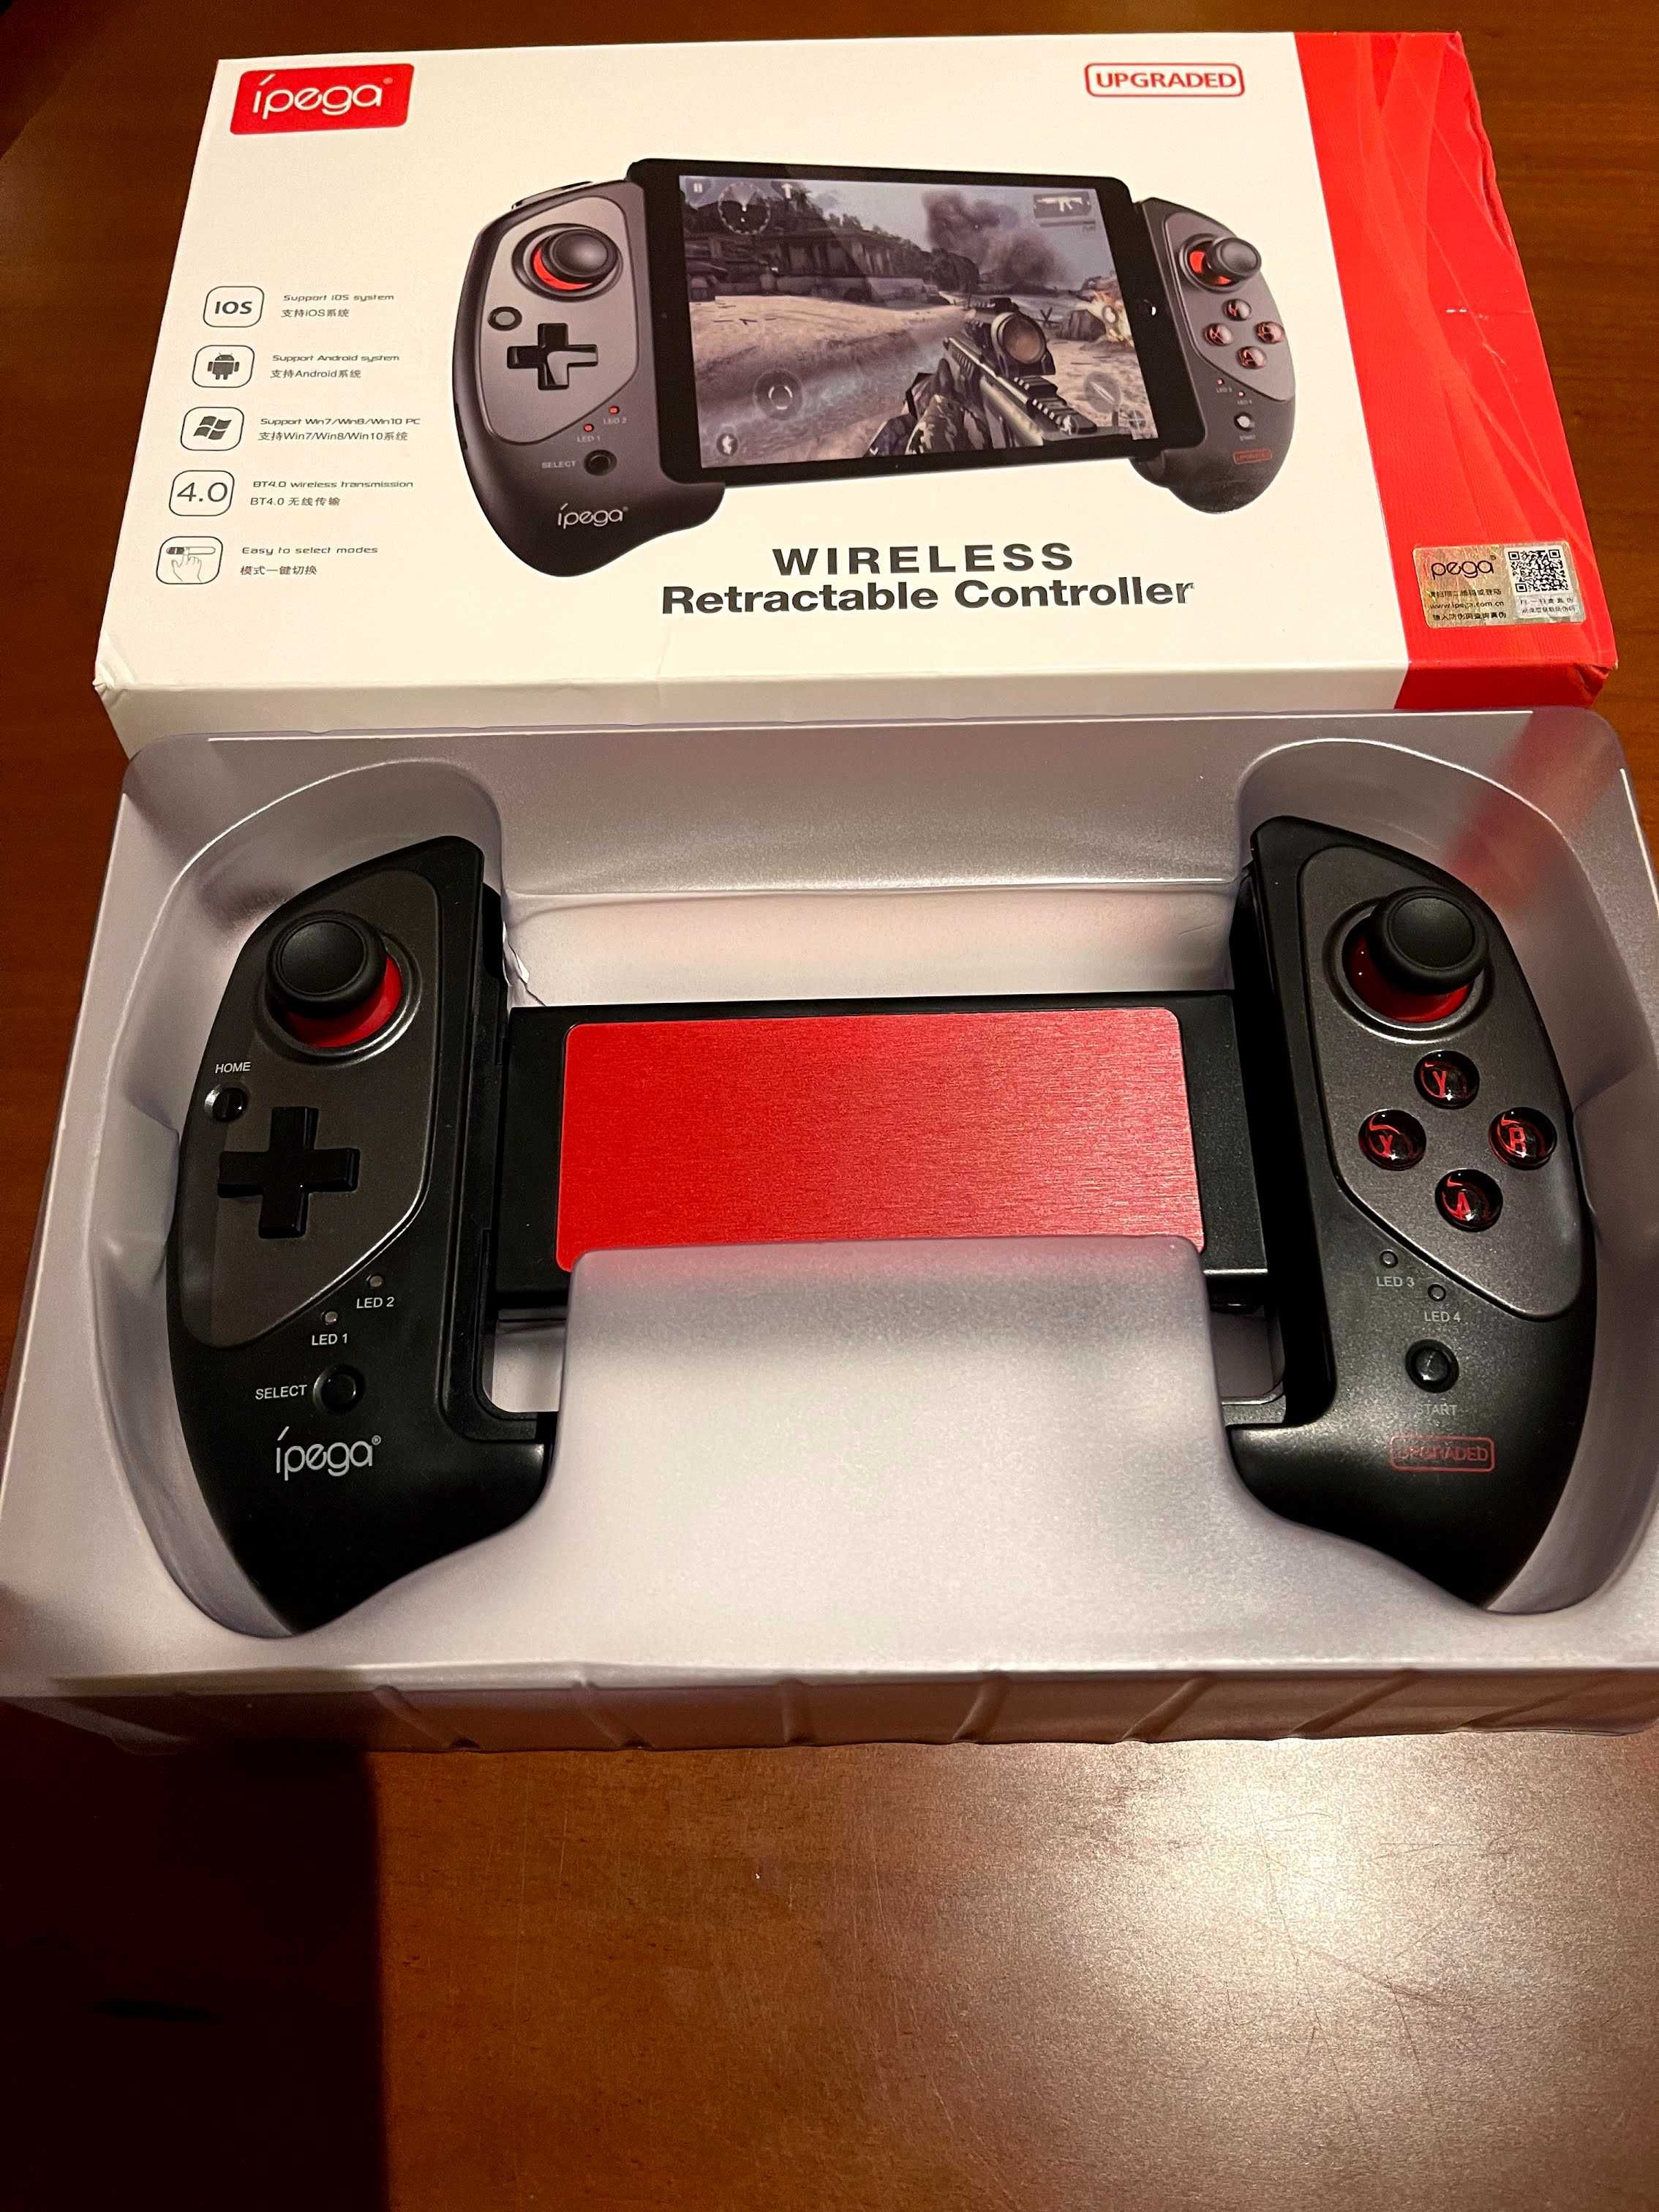 Red Bat Wireless Game Controller